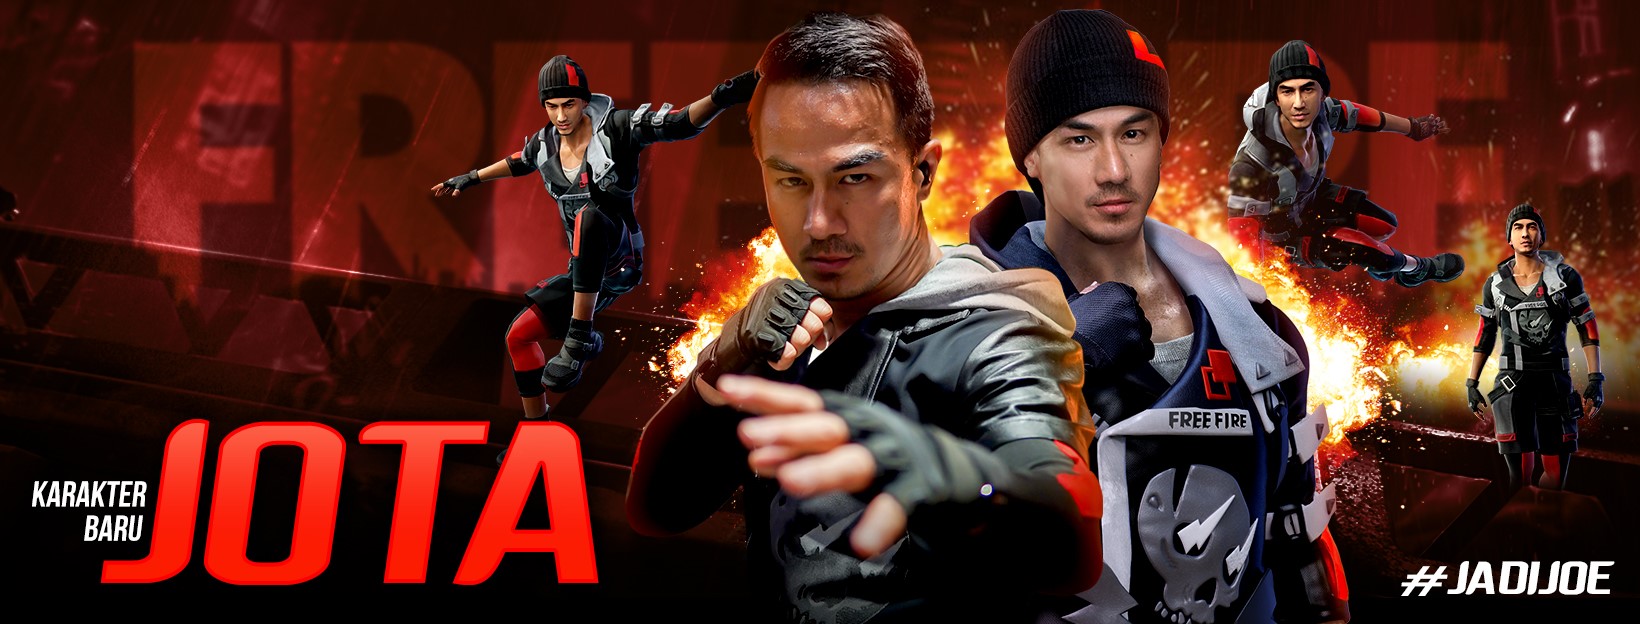 Free Fire S Jota Complete Character Breakdown A Character Based On Indonesian Acto Dunia Games